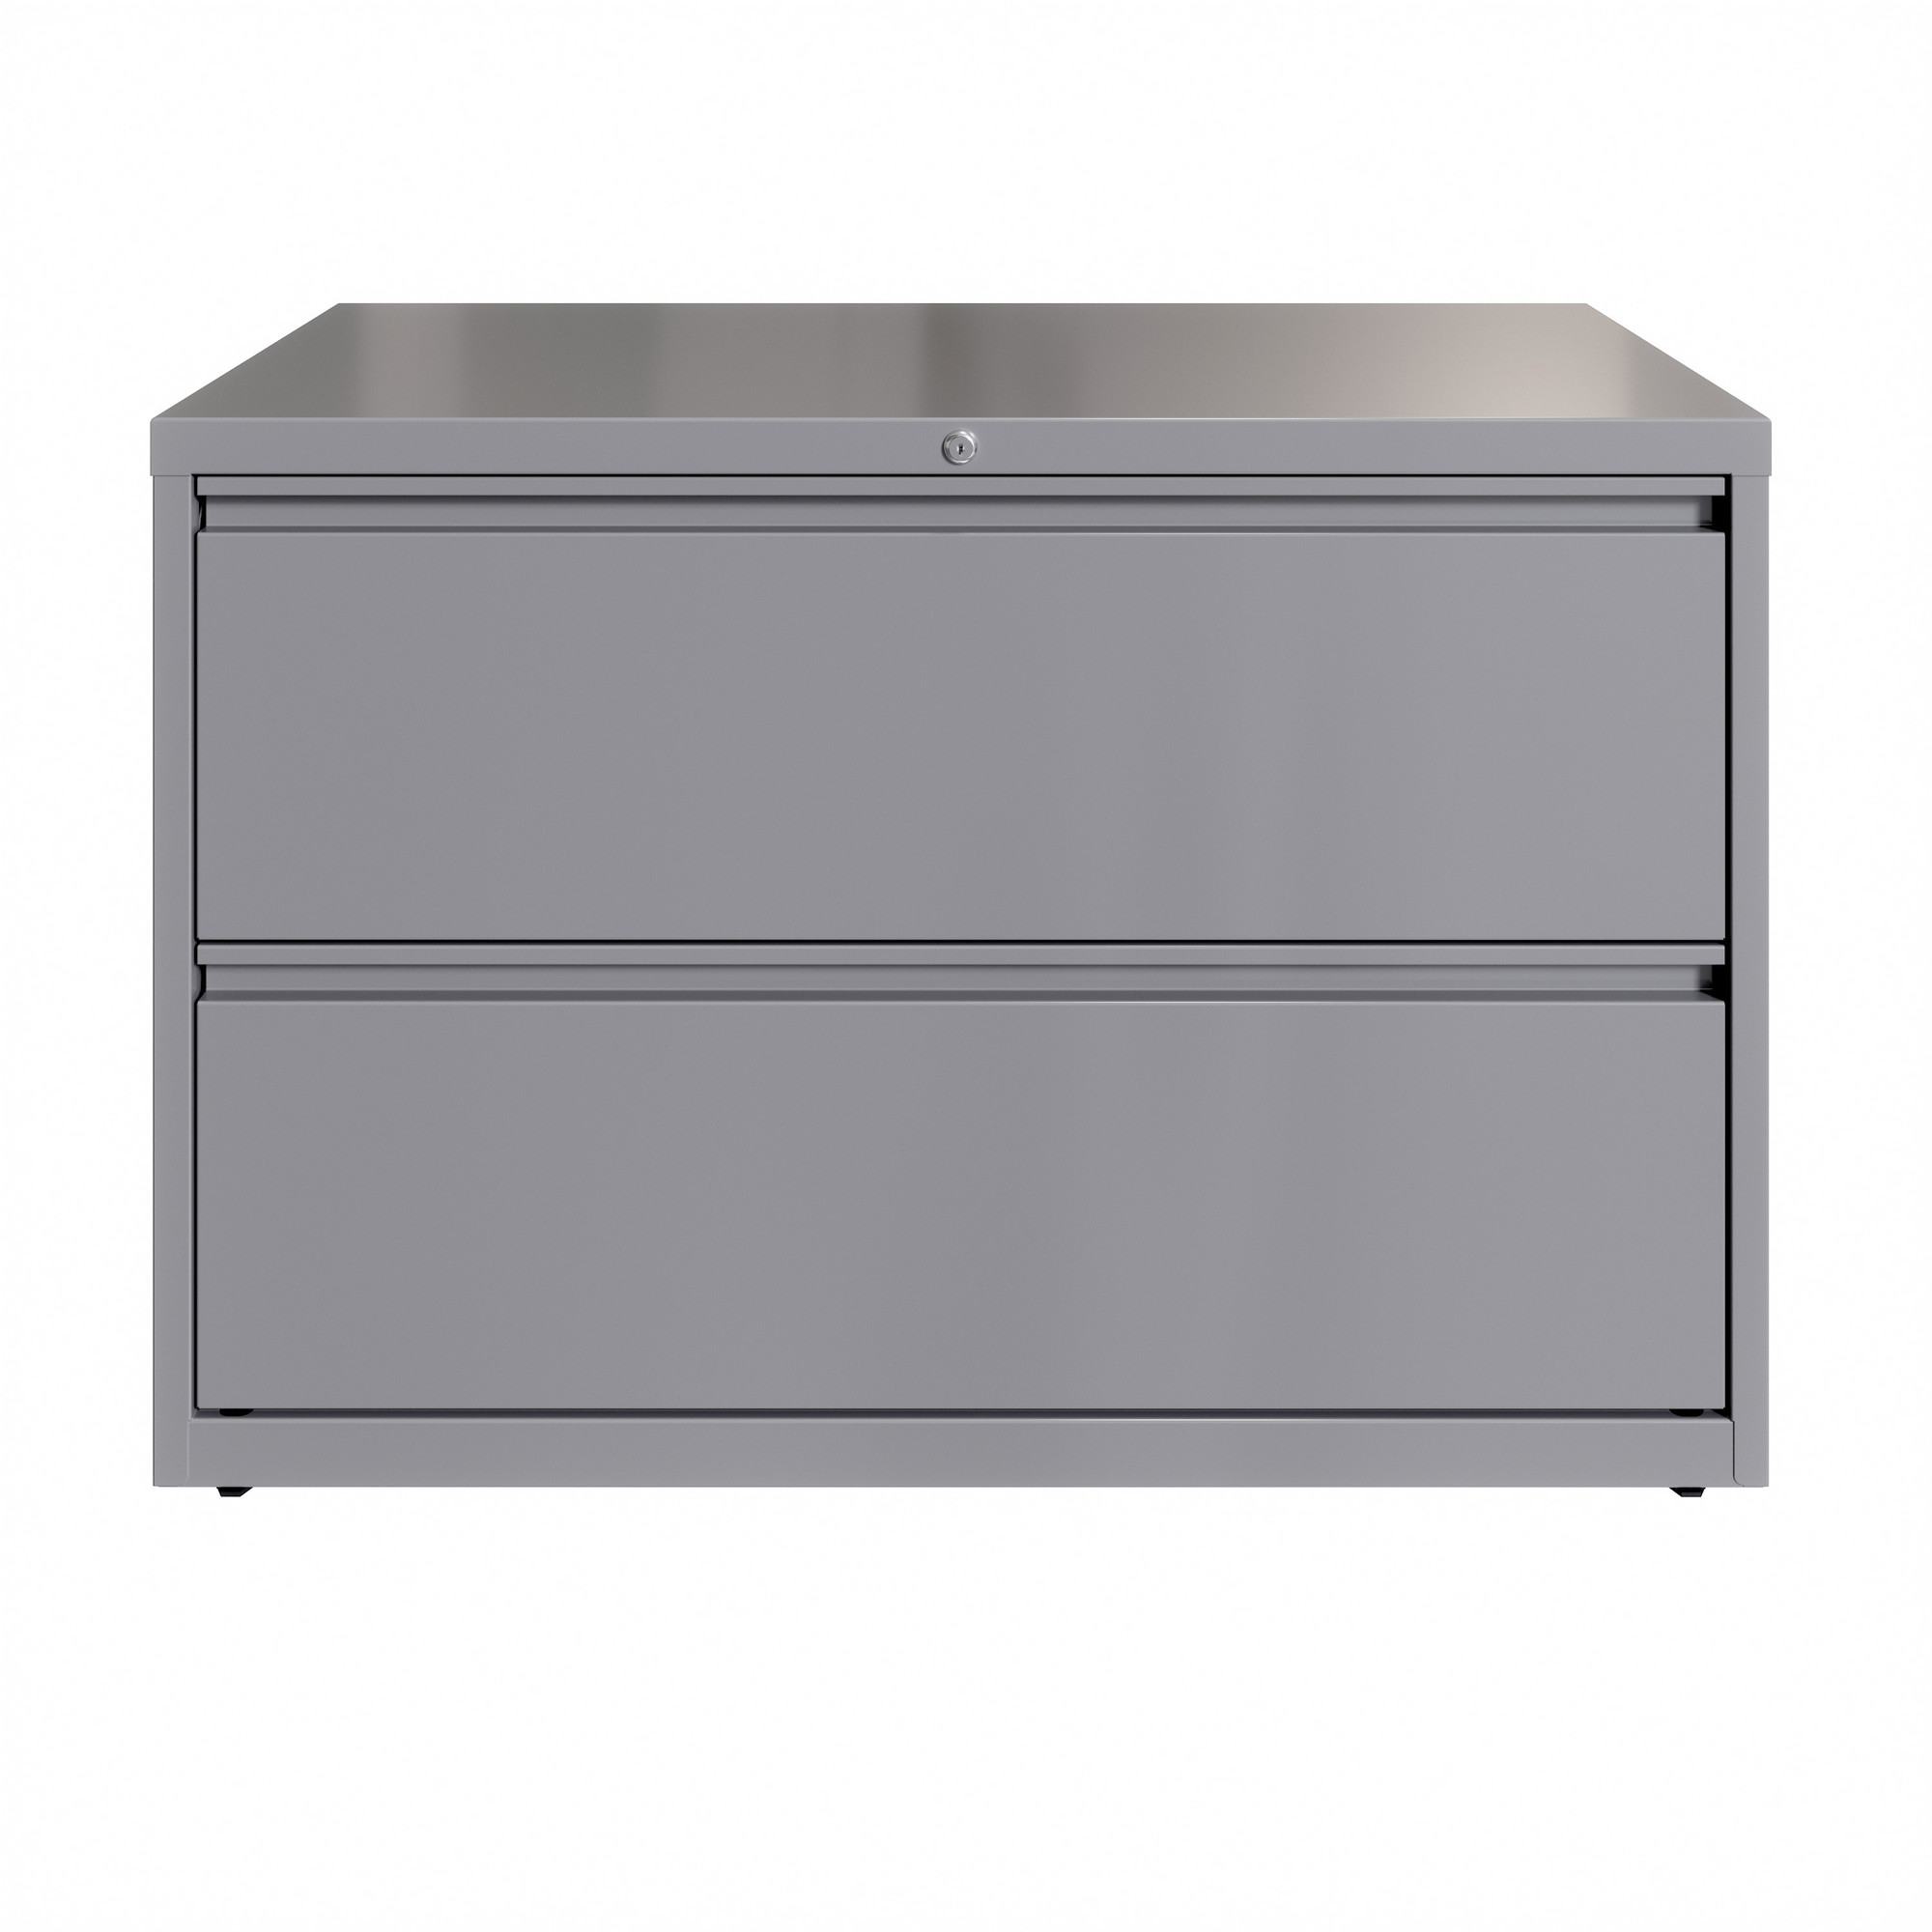 Hirsh Industries, 2 Drawer Lateral File Cabinet, Width 42 in, Depth 18.625 in, Height 28 in, Model 23748